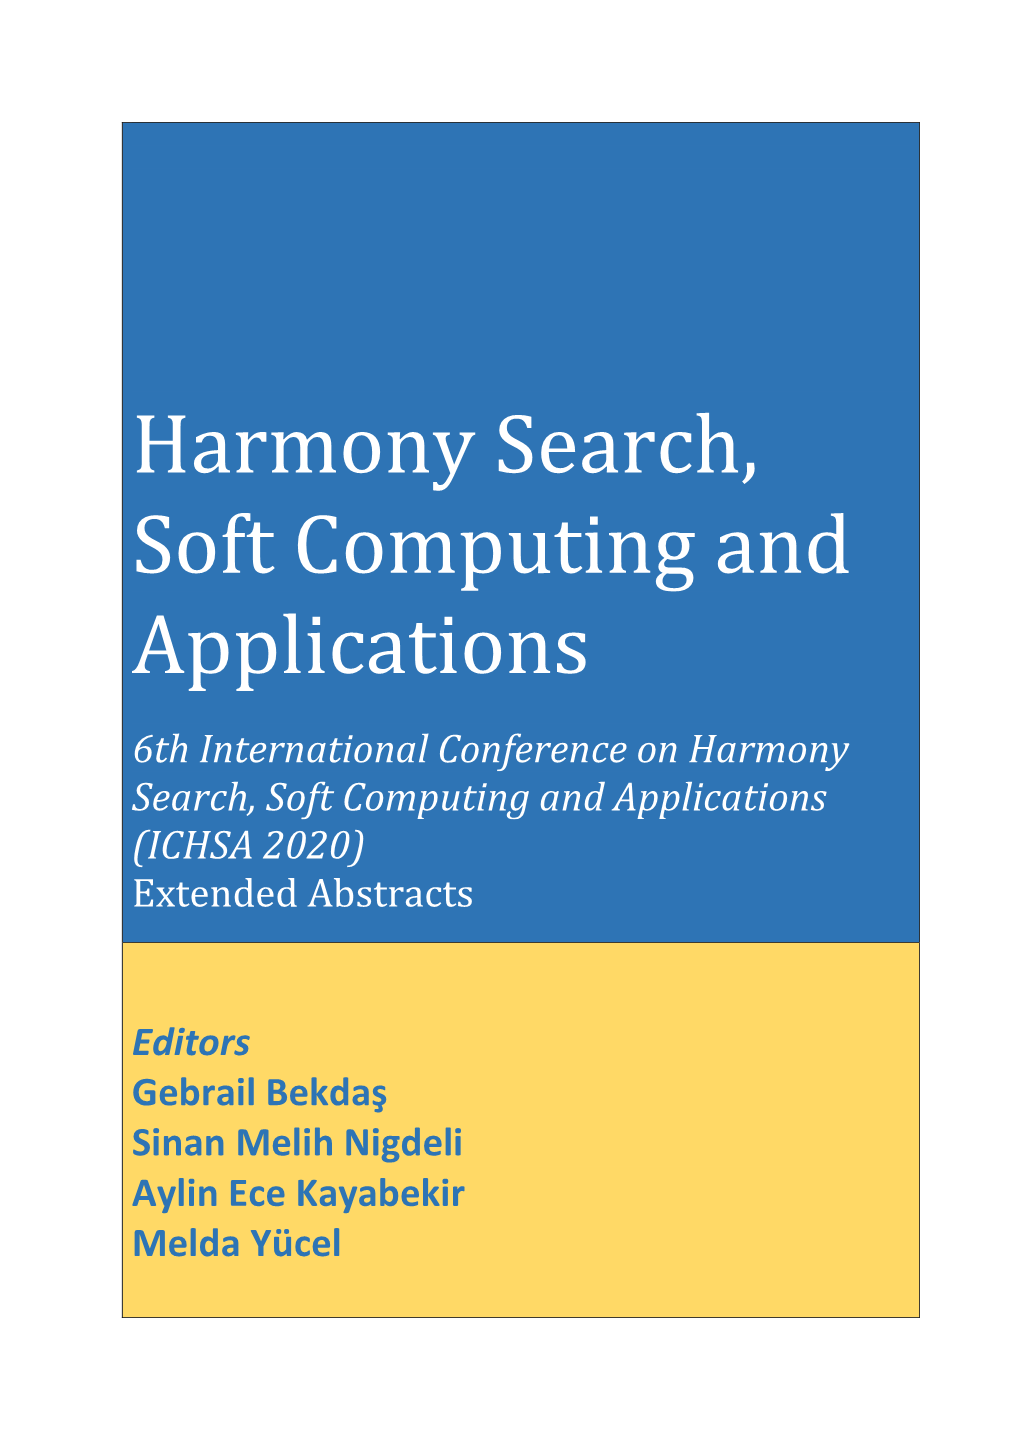 Harmony Search, Soft Computing and Applications 6Th International Conference on Harmony Search, Soft Computing and Applications (ICHSA 2020) Extended Abstracts